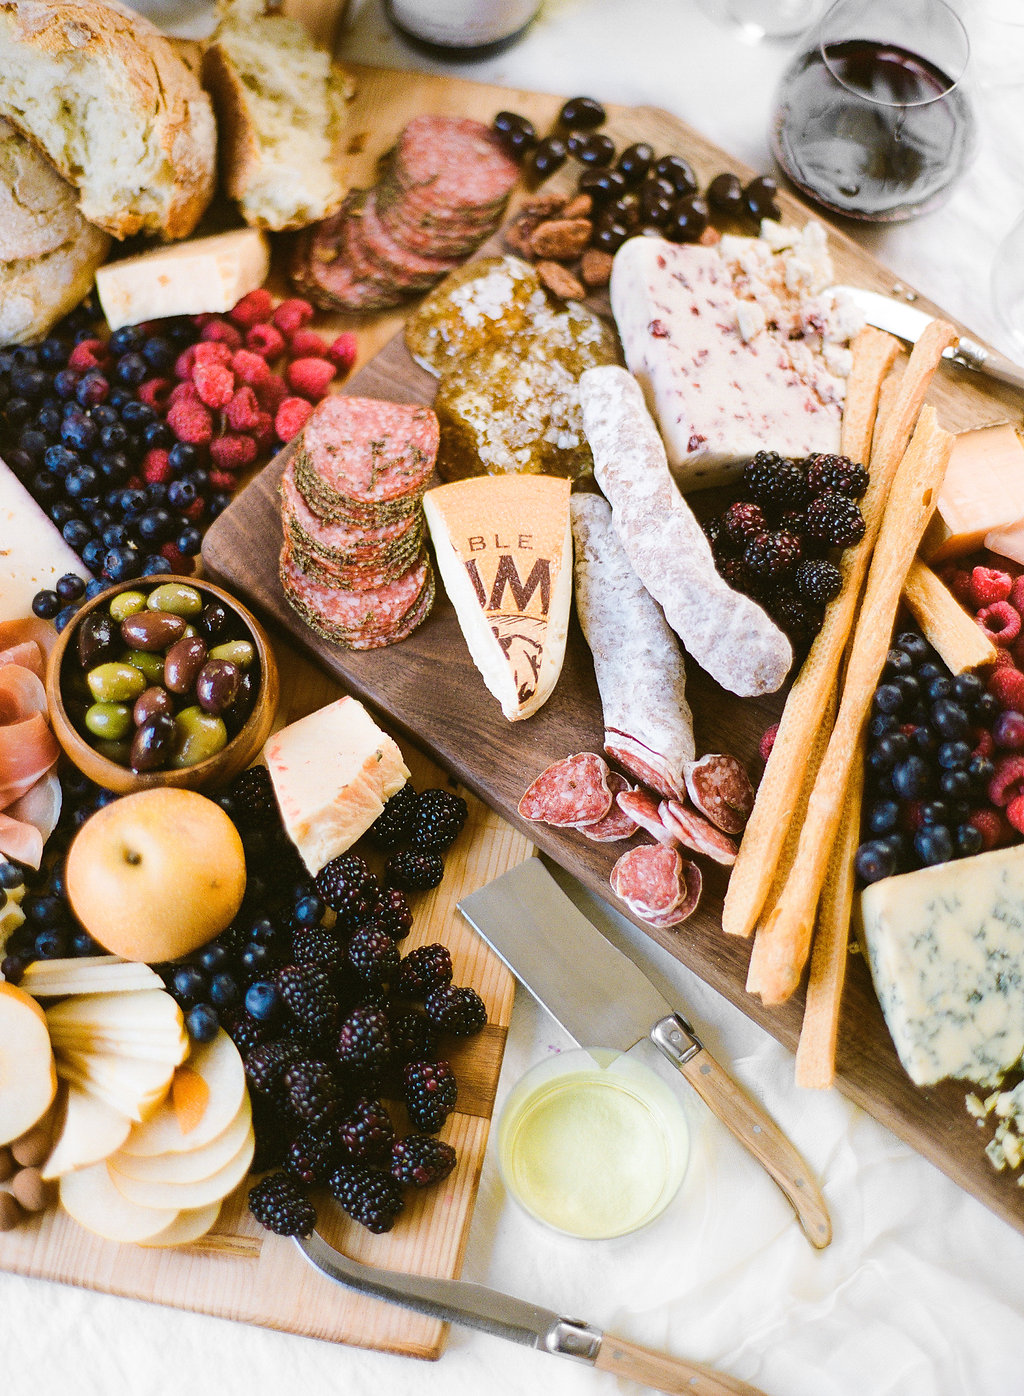 My favorite thing about a wine tasting party is the prep. That might sound weird, but it's fun to put a big beautiful board together full of different fruits, cheeses, proteins, and treats. My approach to building a beautiful spread is to pack it all on.